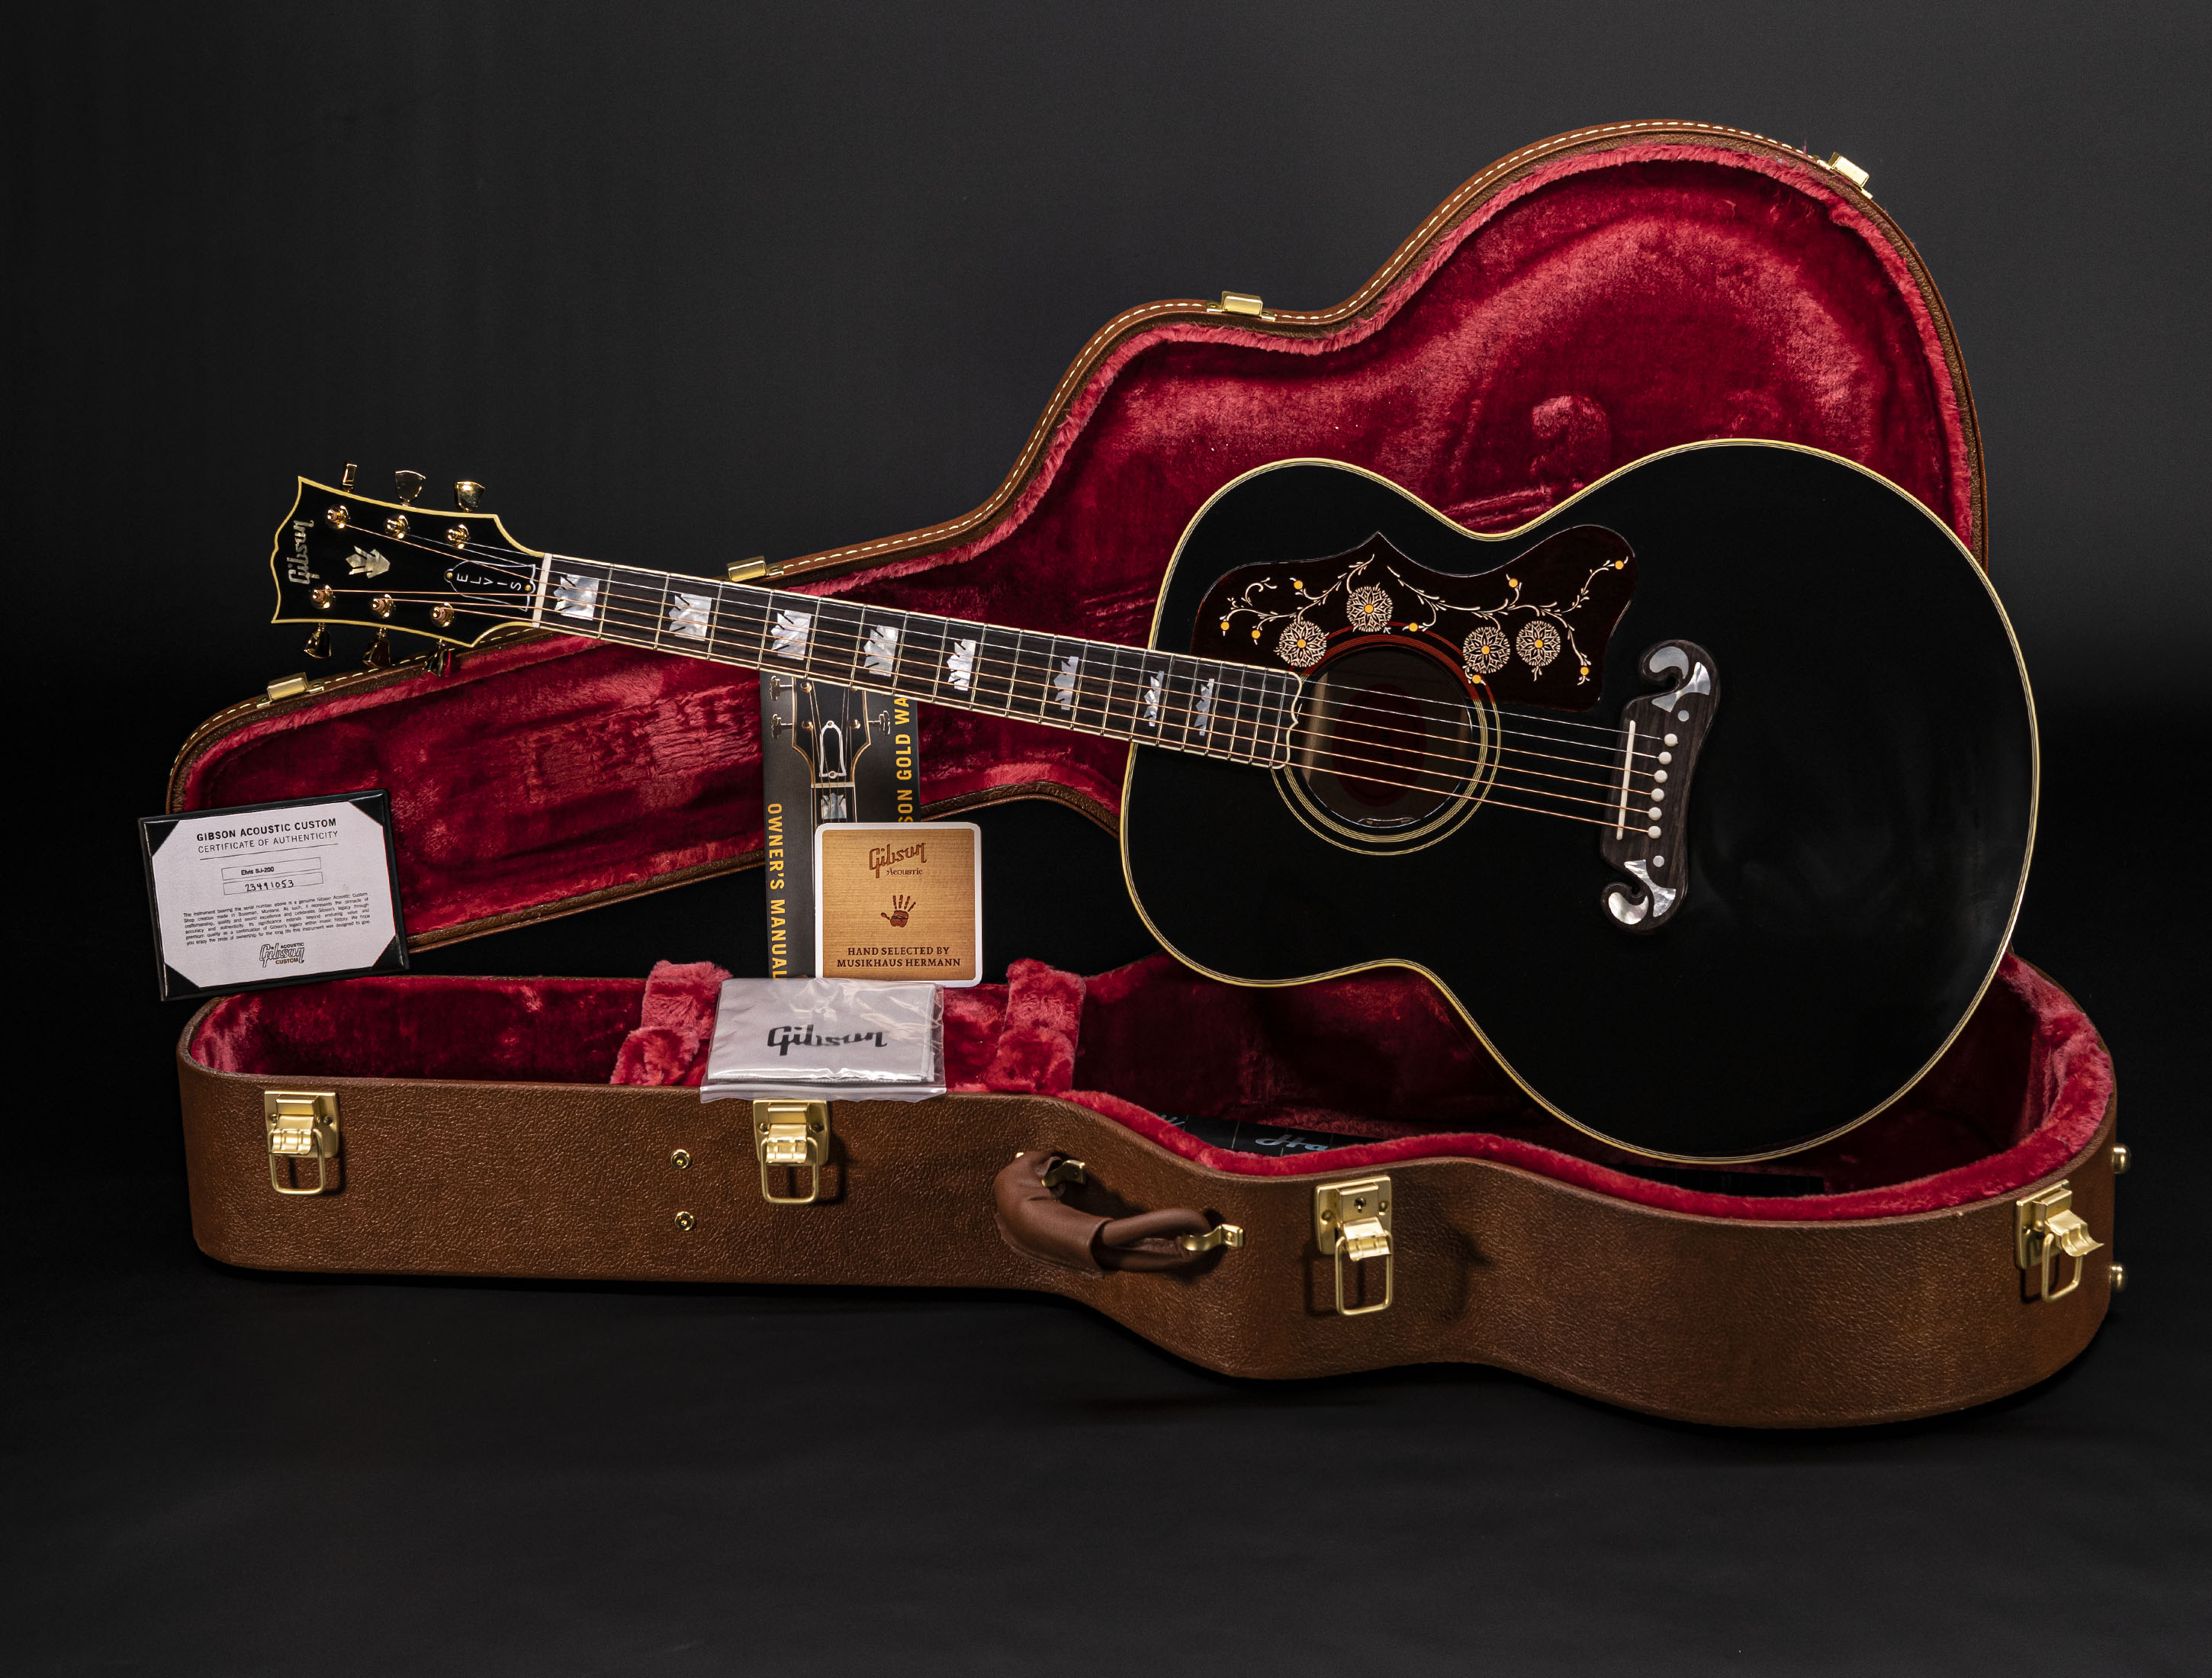 Gibson Elvis Presley SJ-200 Signature - The King of Rock and Roll